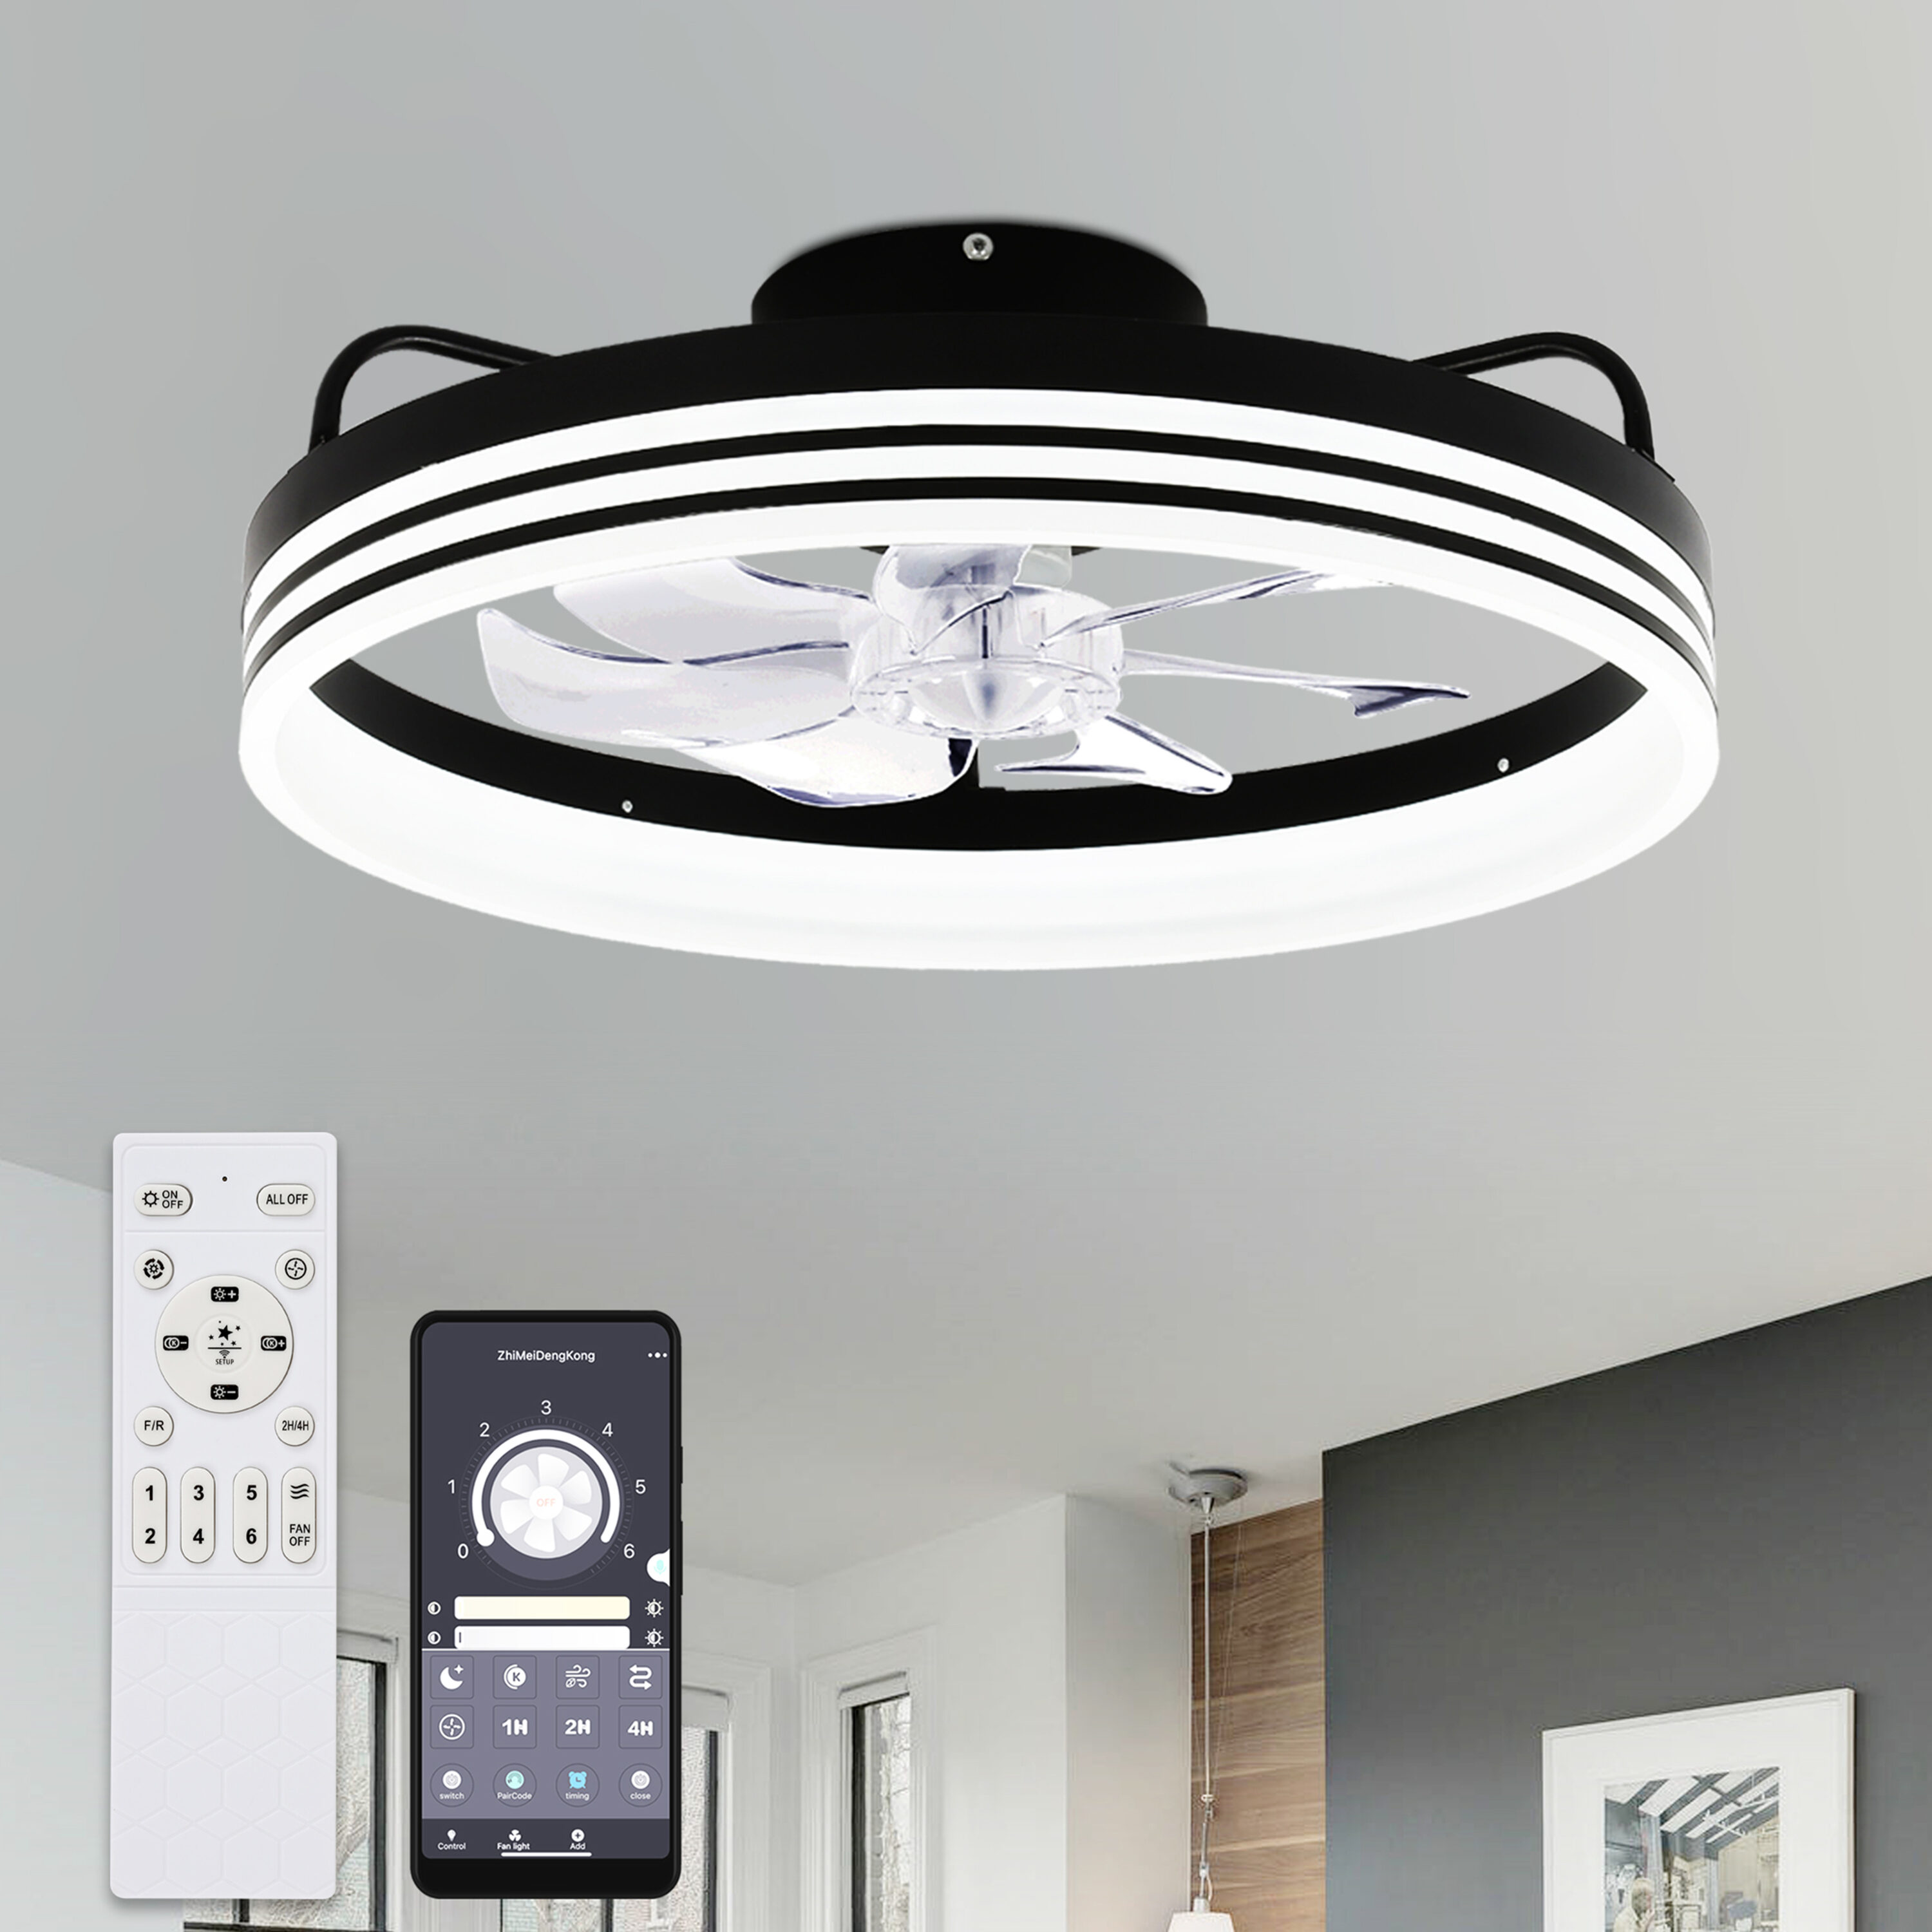 20 in. Black Low Profile Flush Mount LED with Remote and APP Smart Control  Indoor Ceiling Fan with Dimmable Lighting